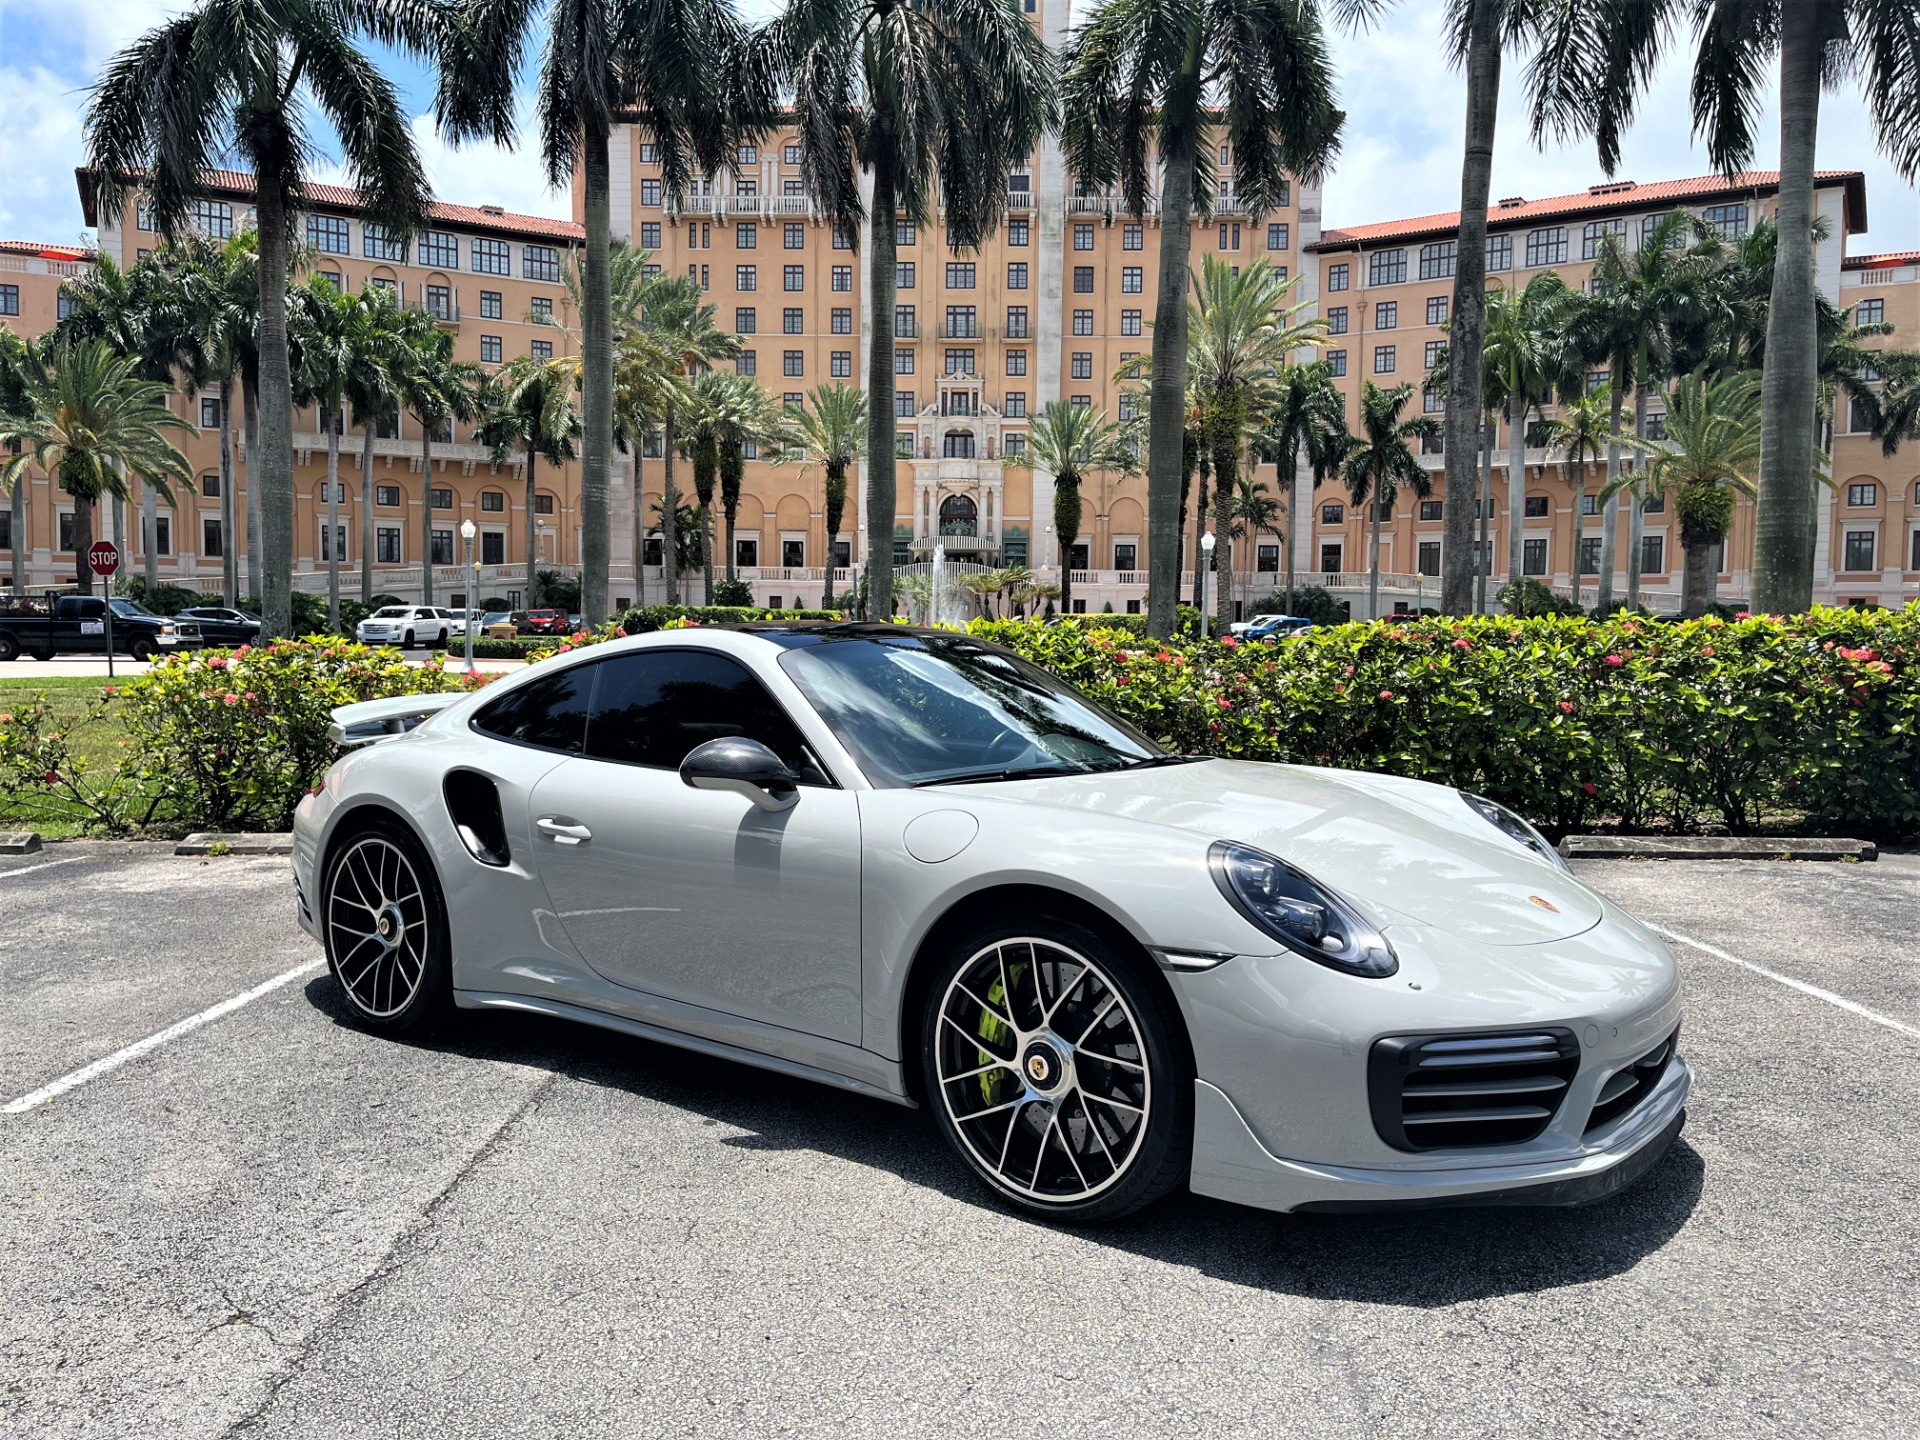 Used 2018 Porsche 911 Turbo S for sale $166,850 at The Gables Sports Cars in Miami FL 33146 1